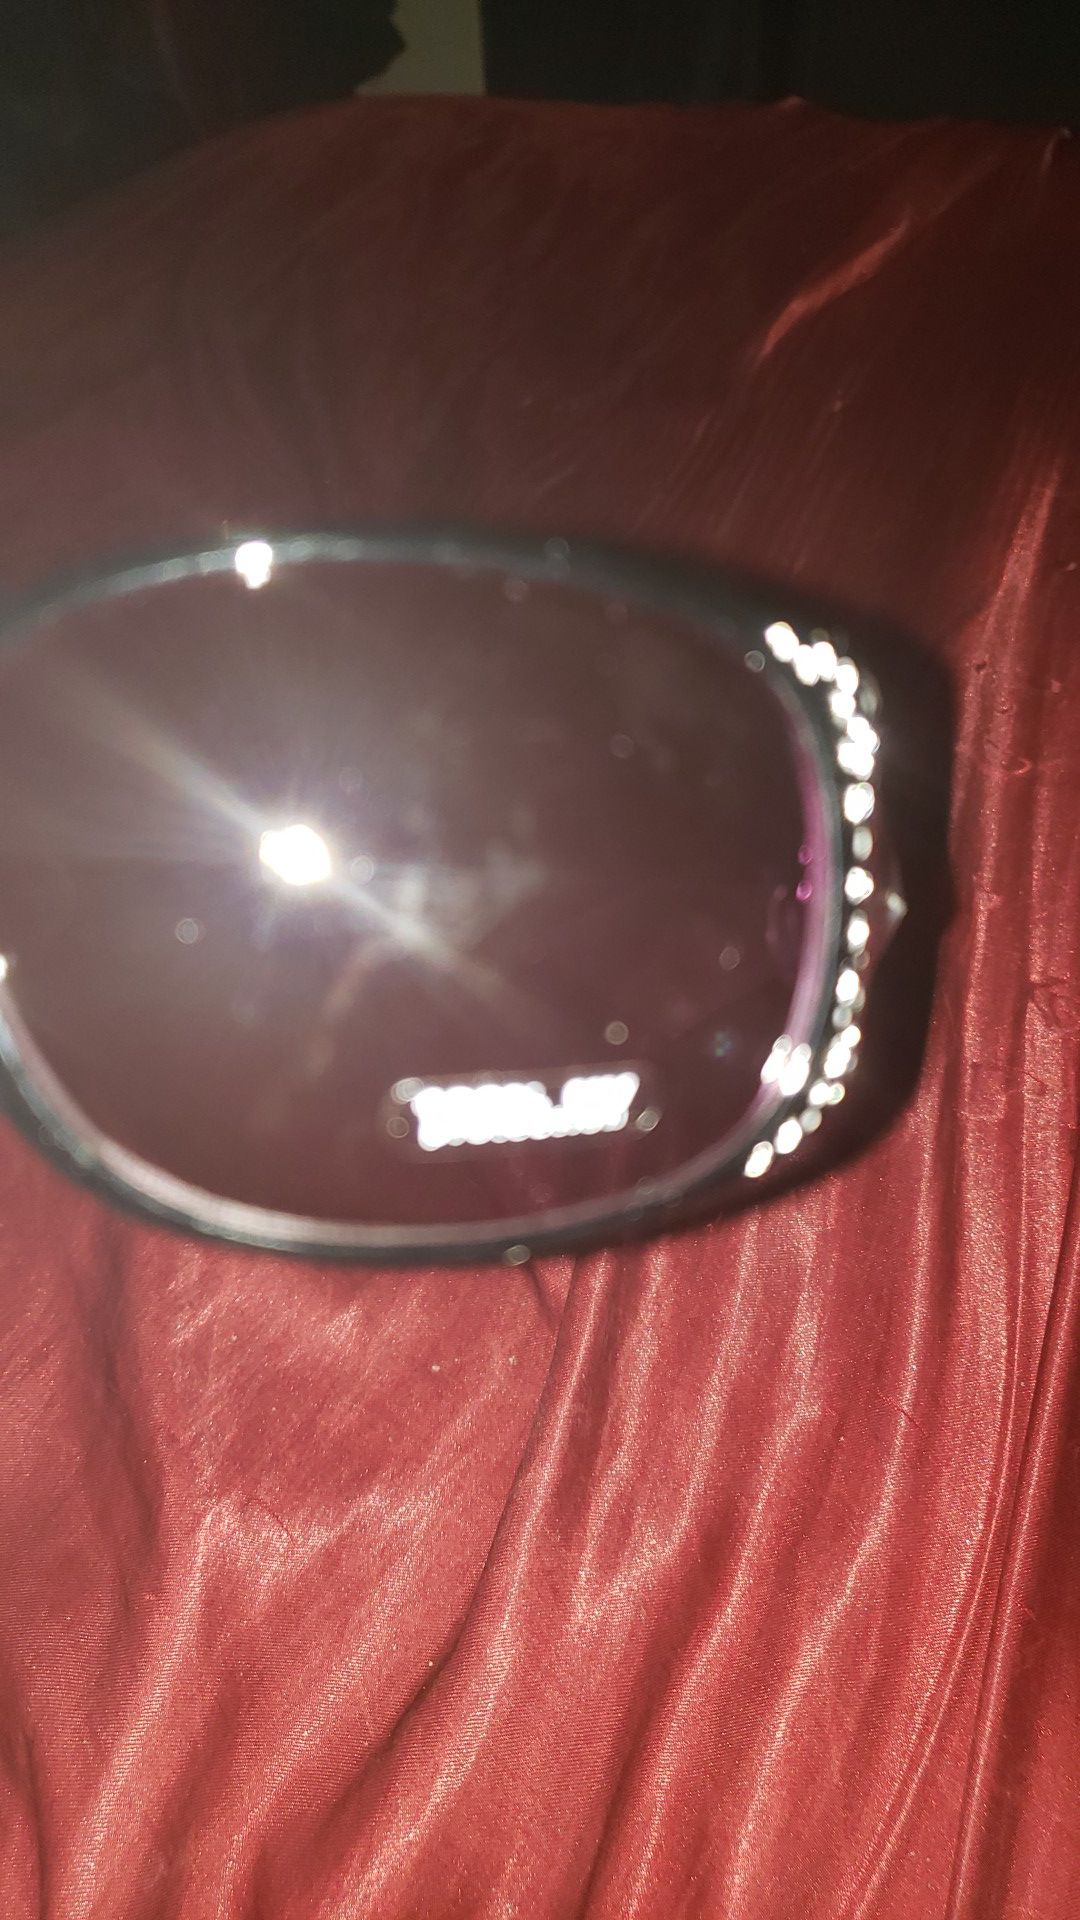 BLACK WOMEN EMBELLISHED WRAP SUNGLASSES WIT RHINESTONES ON BOTH SIDES OF DA ARMS, N DA FRONT SIDES 2, N 100% UV PROTECTION FROM DA SUN!!!!!!!!!!!!!!